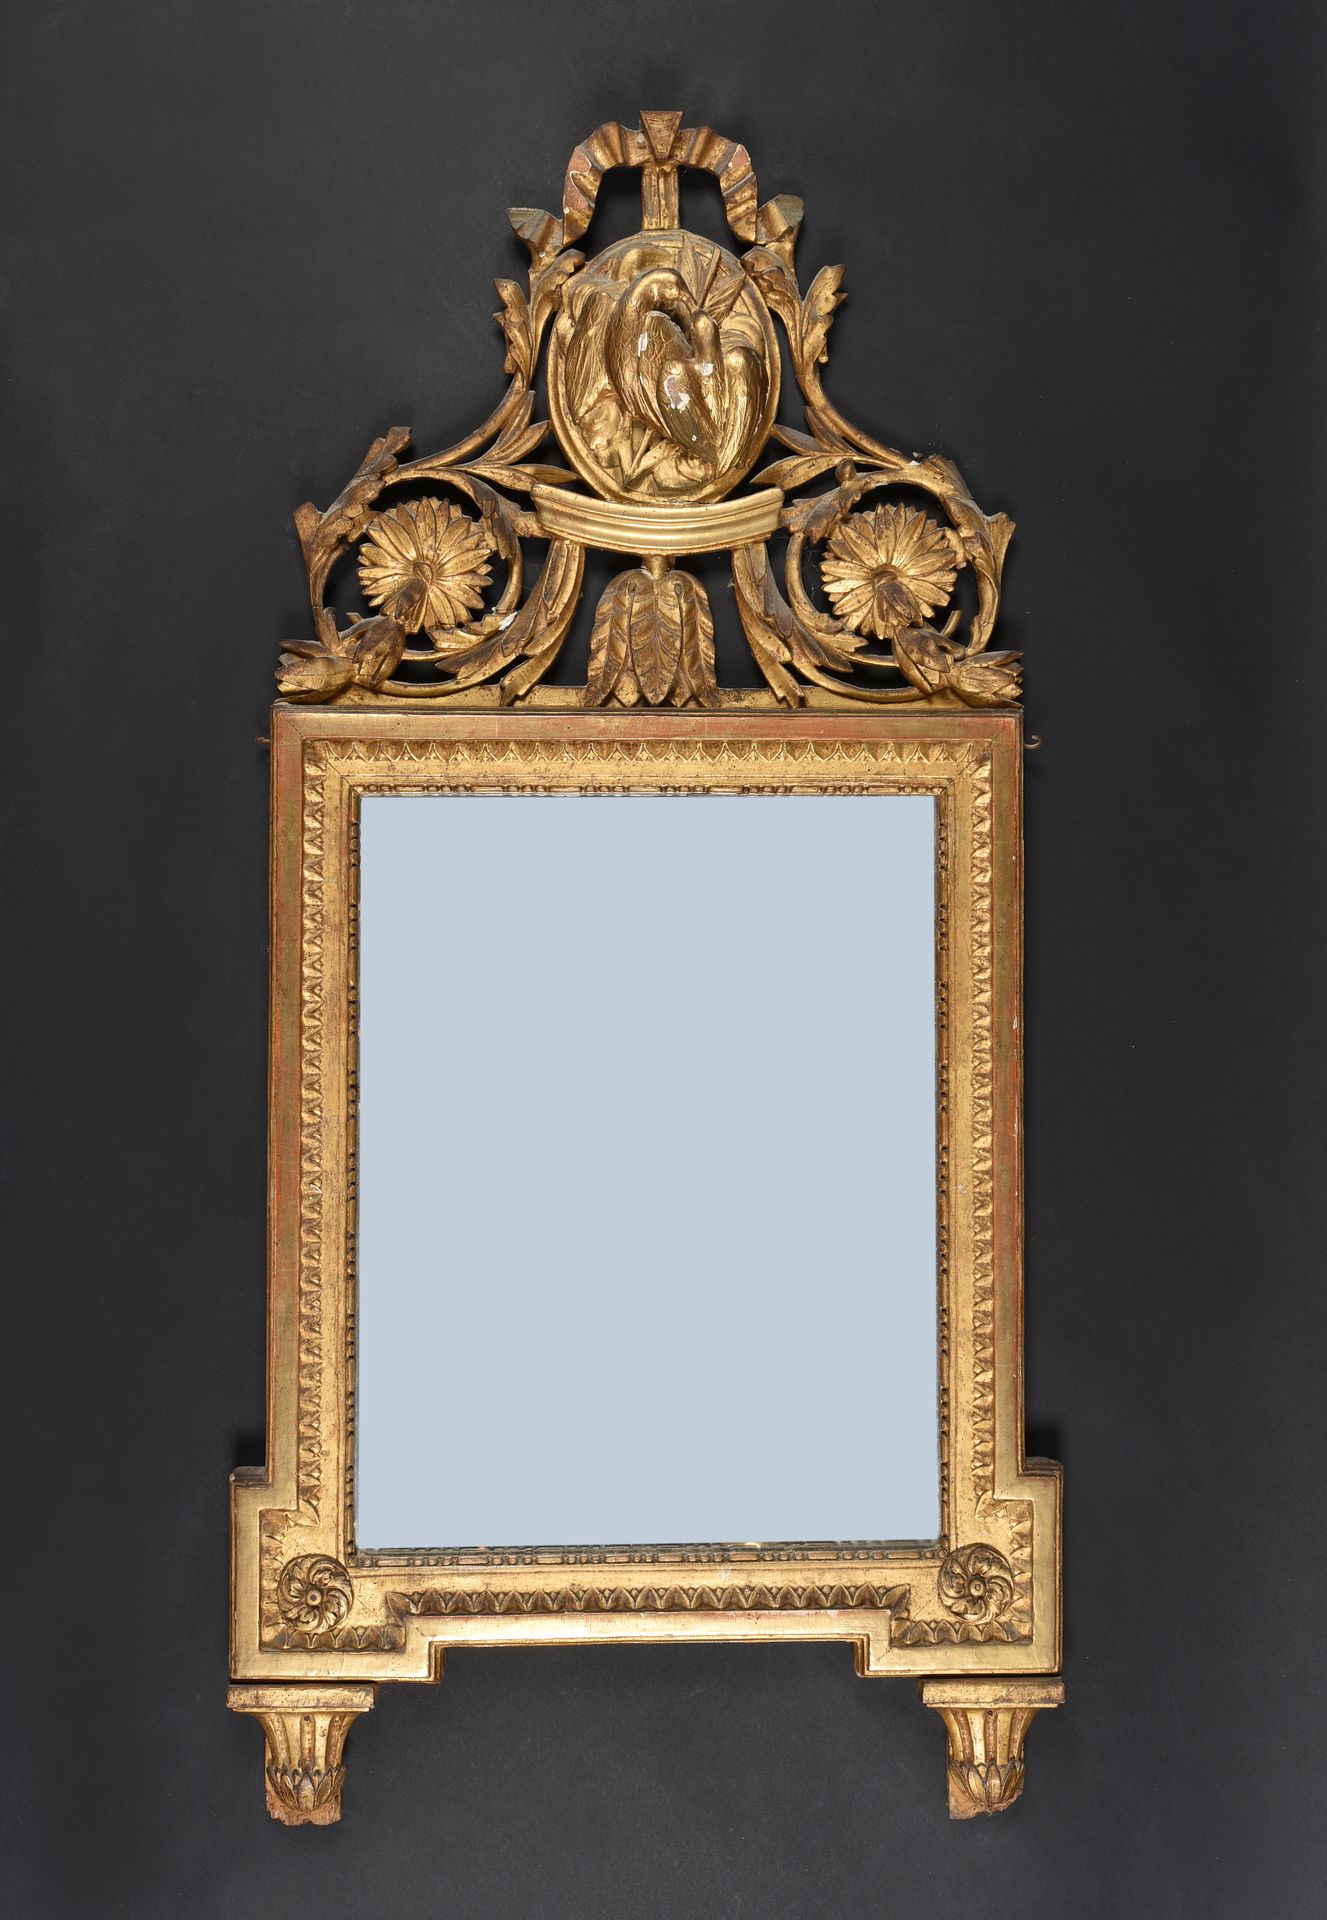 Null MIRROR IN A FRAME

In gilded and carved wood. On the pediment two doves.

L&hellip;